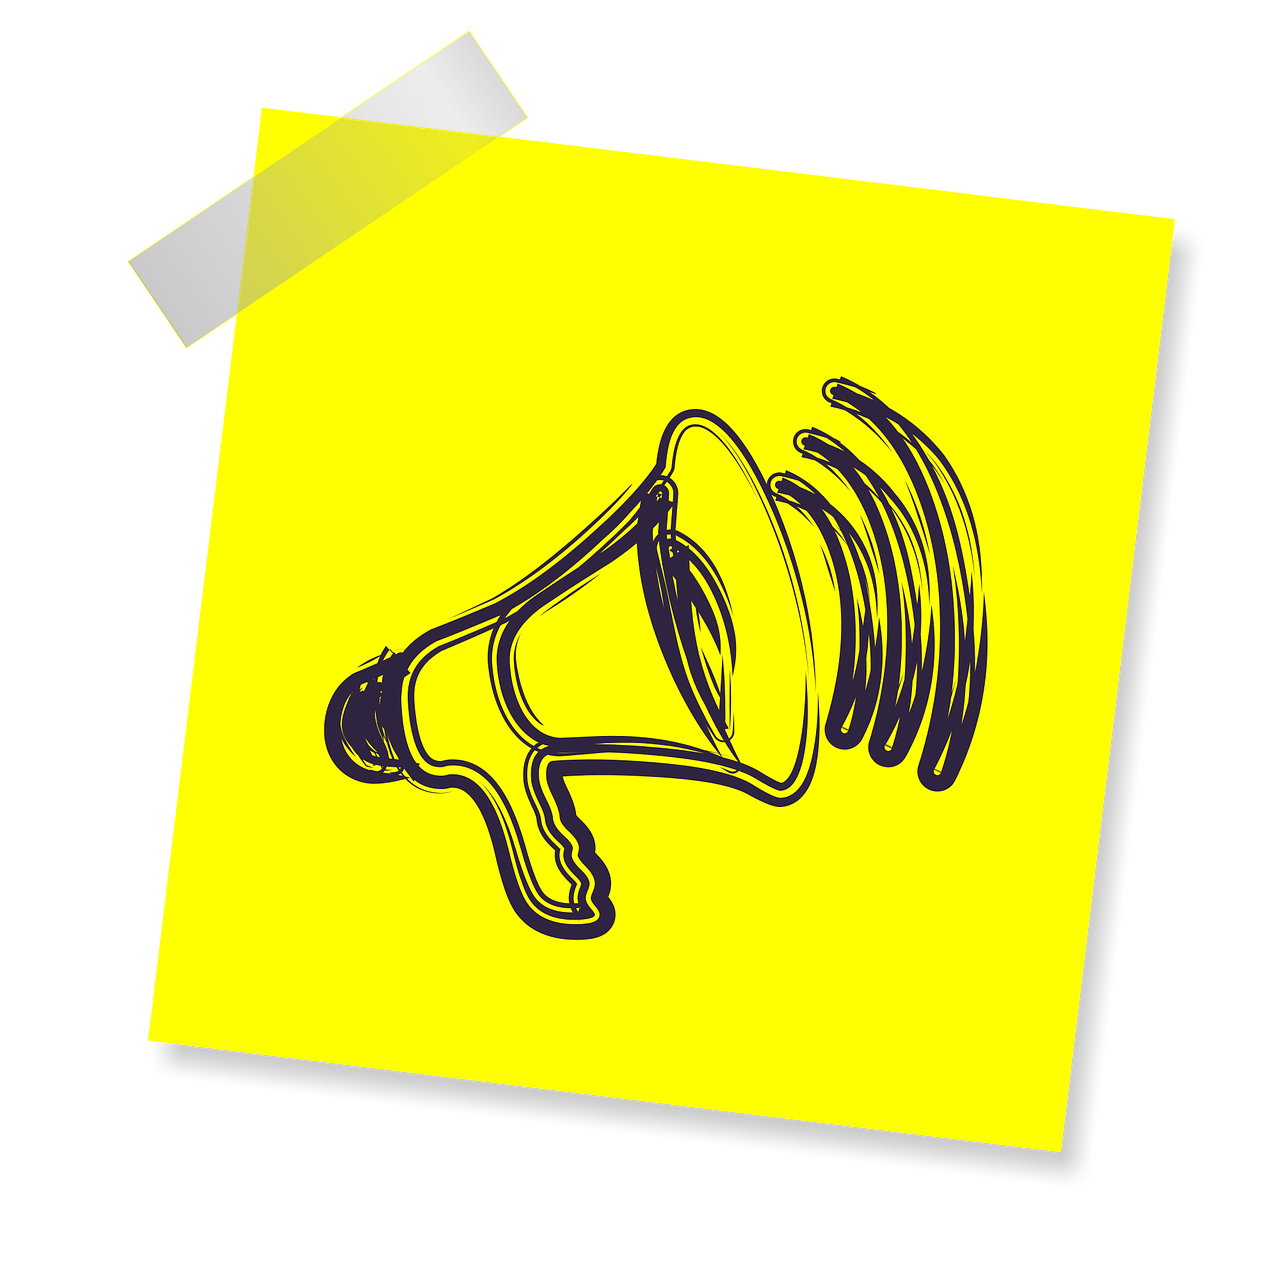 A drawing of a megaphone on a post it note